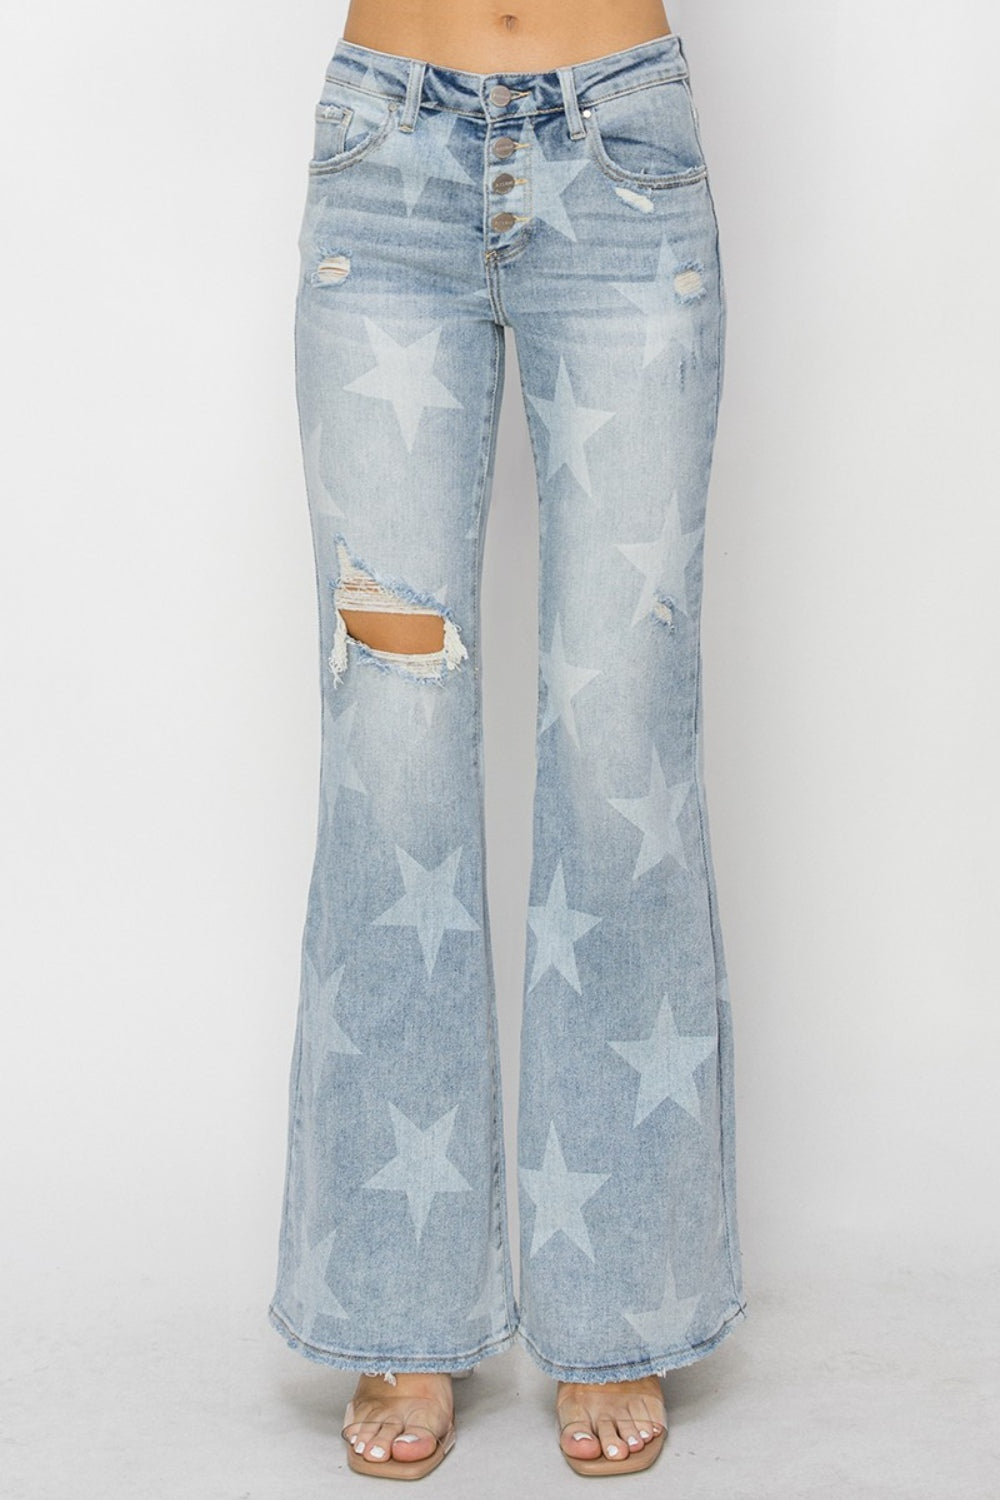 These Mid Rise Button Fly Star Print Flare Jeans are a unique and trendy addition to your denim collection. The mid-rise fit offers a flattering and comfortable silhouette, while the button fly adds a touch of vintage charm.  0 -15